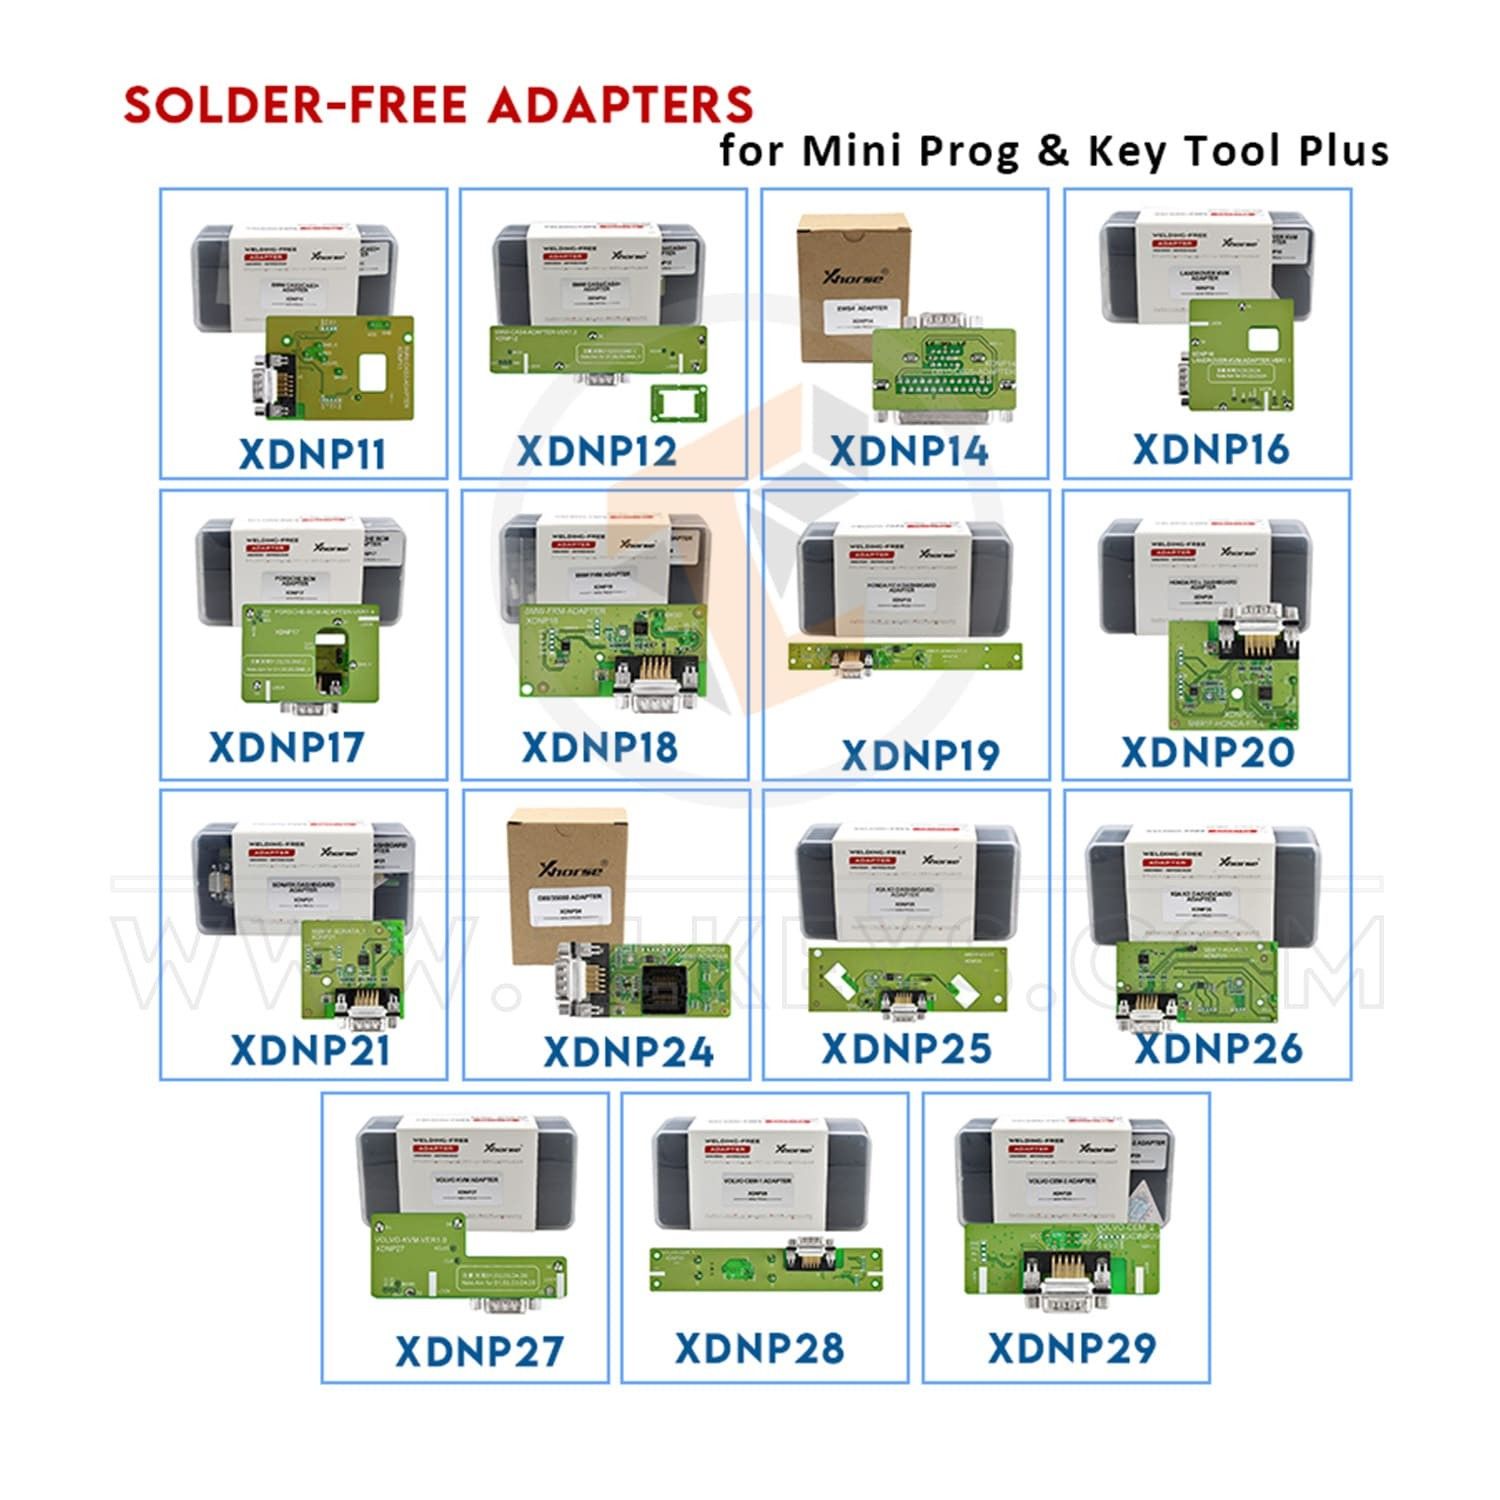 Xhorse Solder Free Adapters for VVDI Mini Prog and Key Tool Plus Compatible with Manufacturers Xhorse